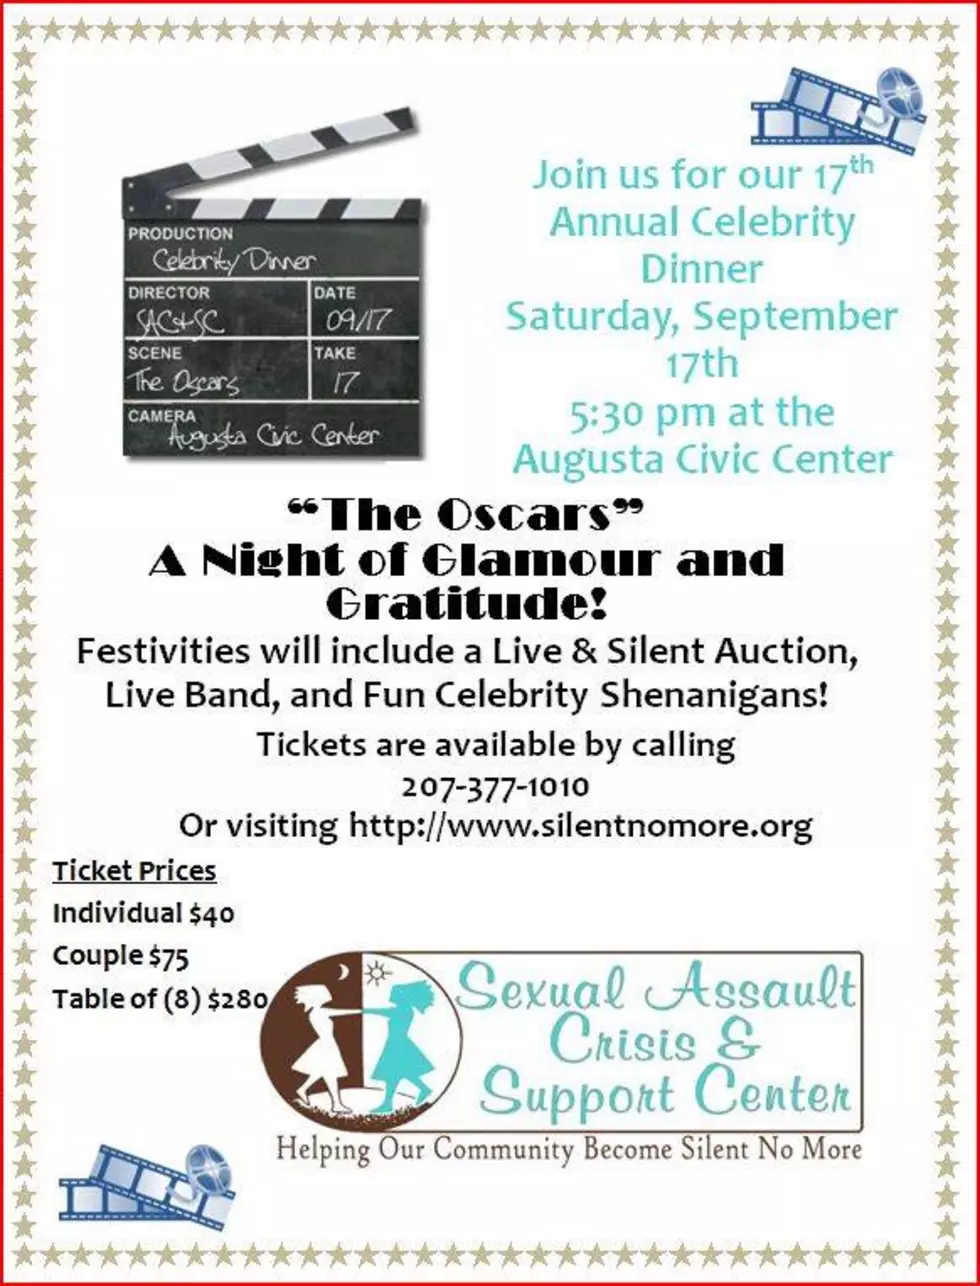 Sexual Assault Crisis And Support Center&#8217;s 17th Annual Celebrity Dinner Saturday At The Augusta Civic Center